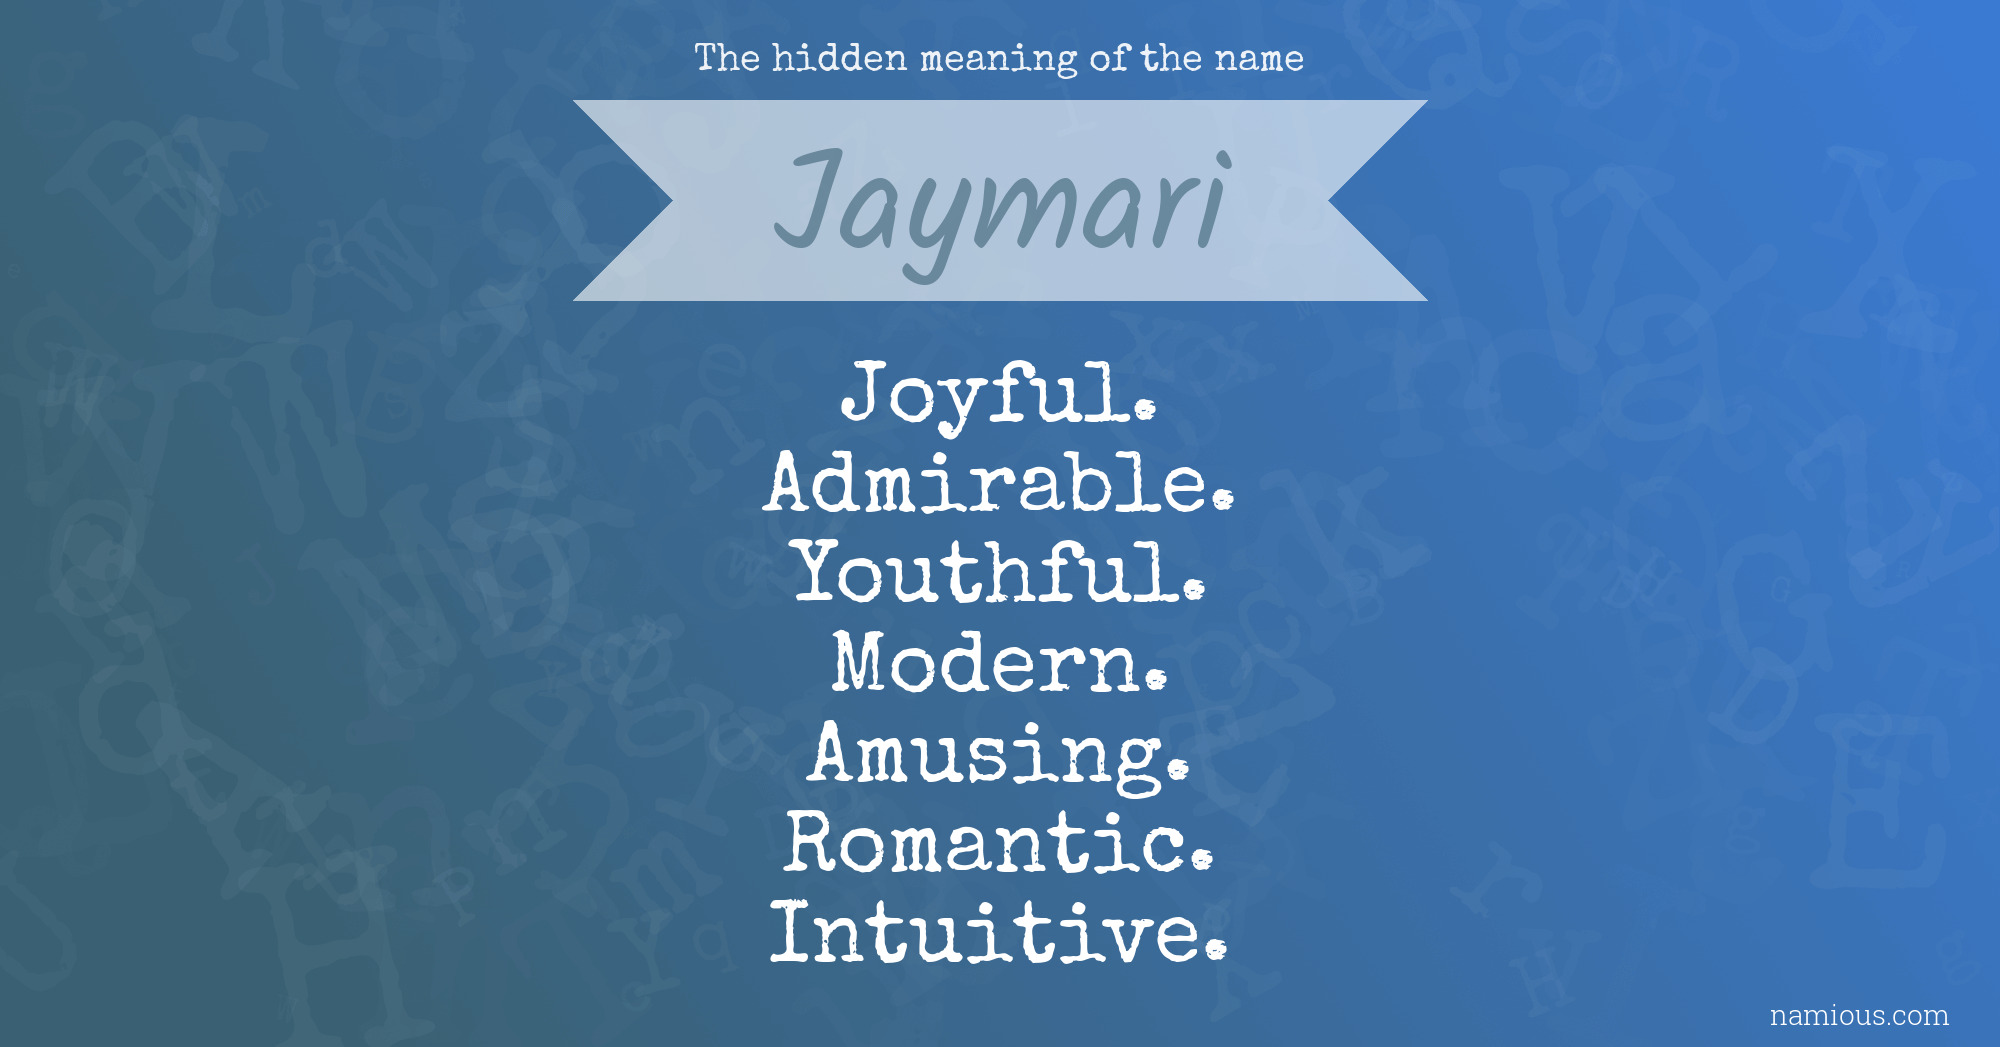 The hidden meaning of the name Jaymari